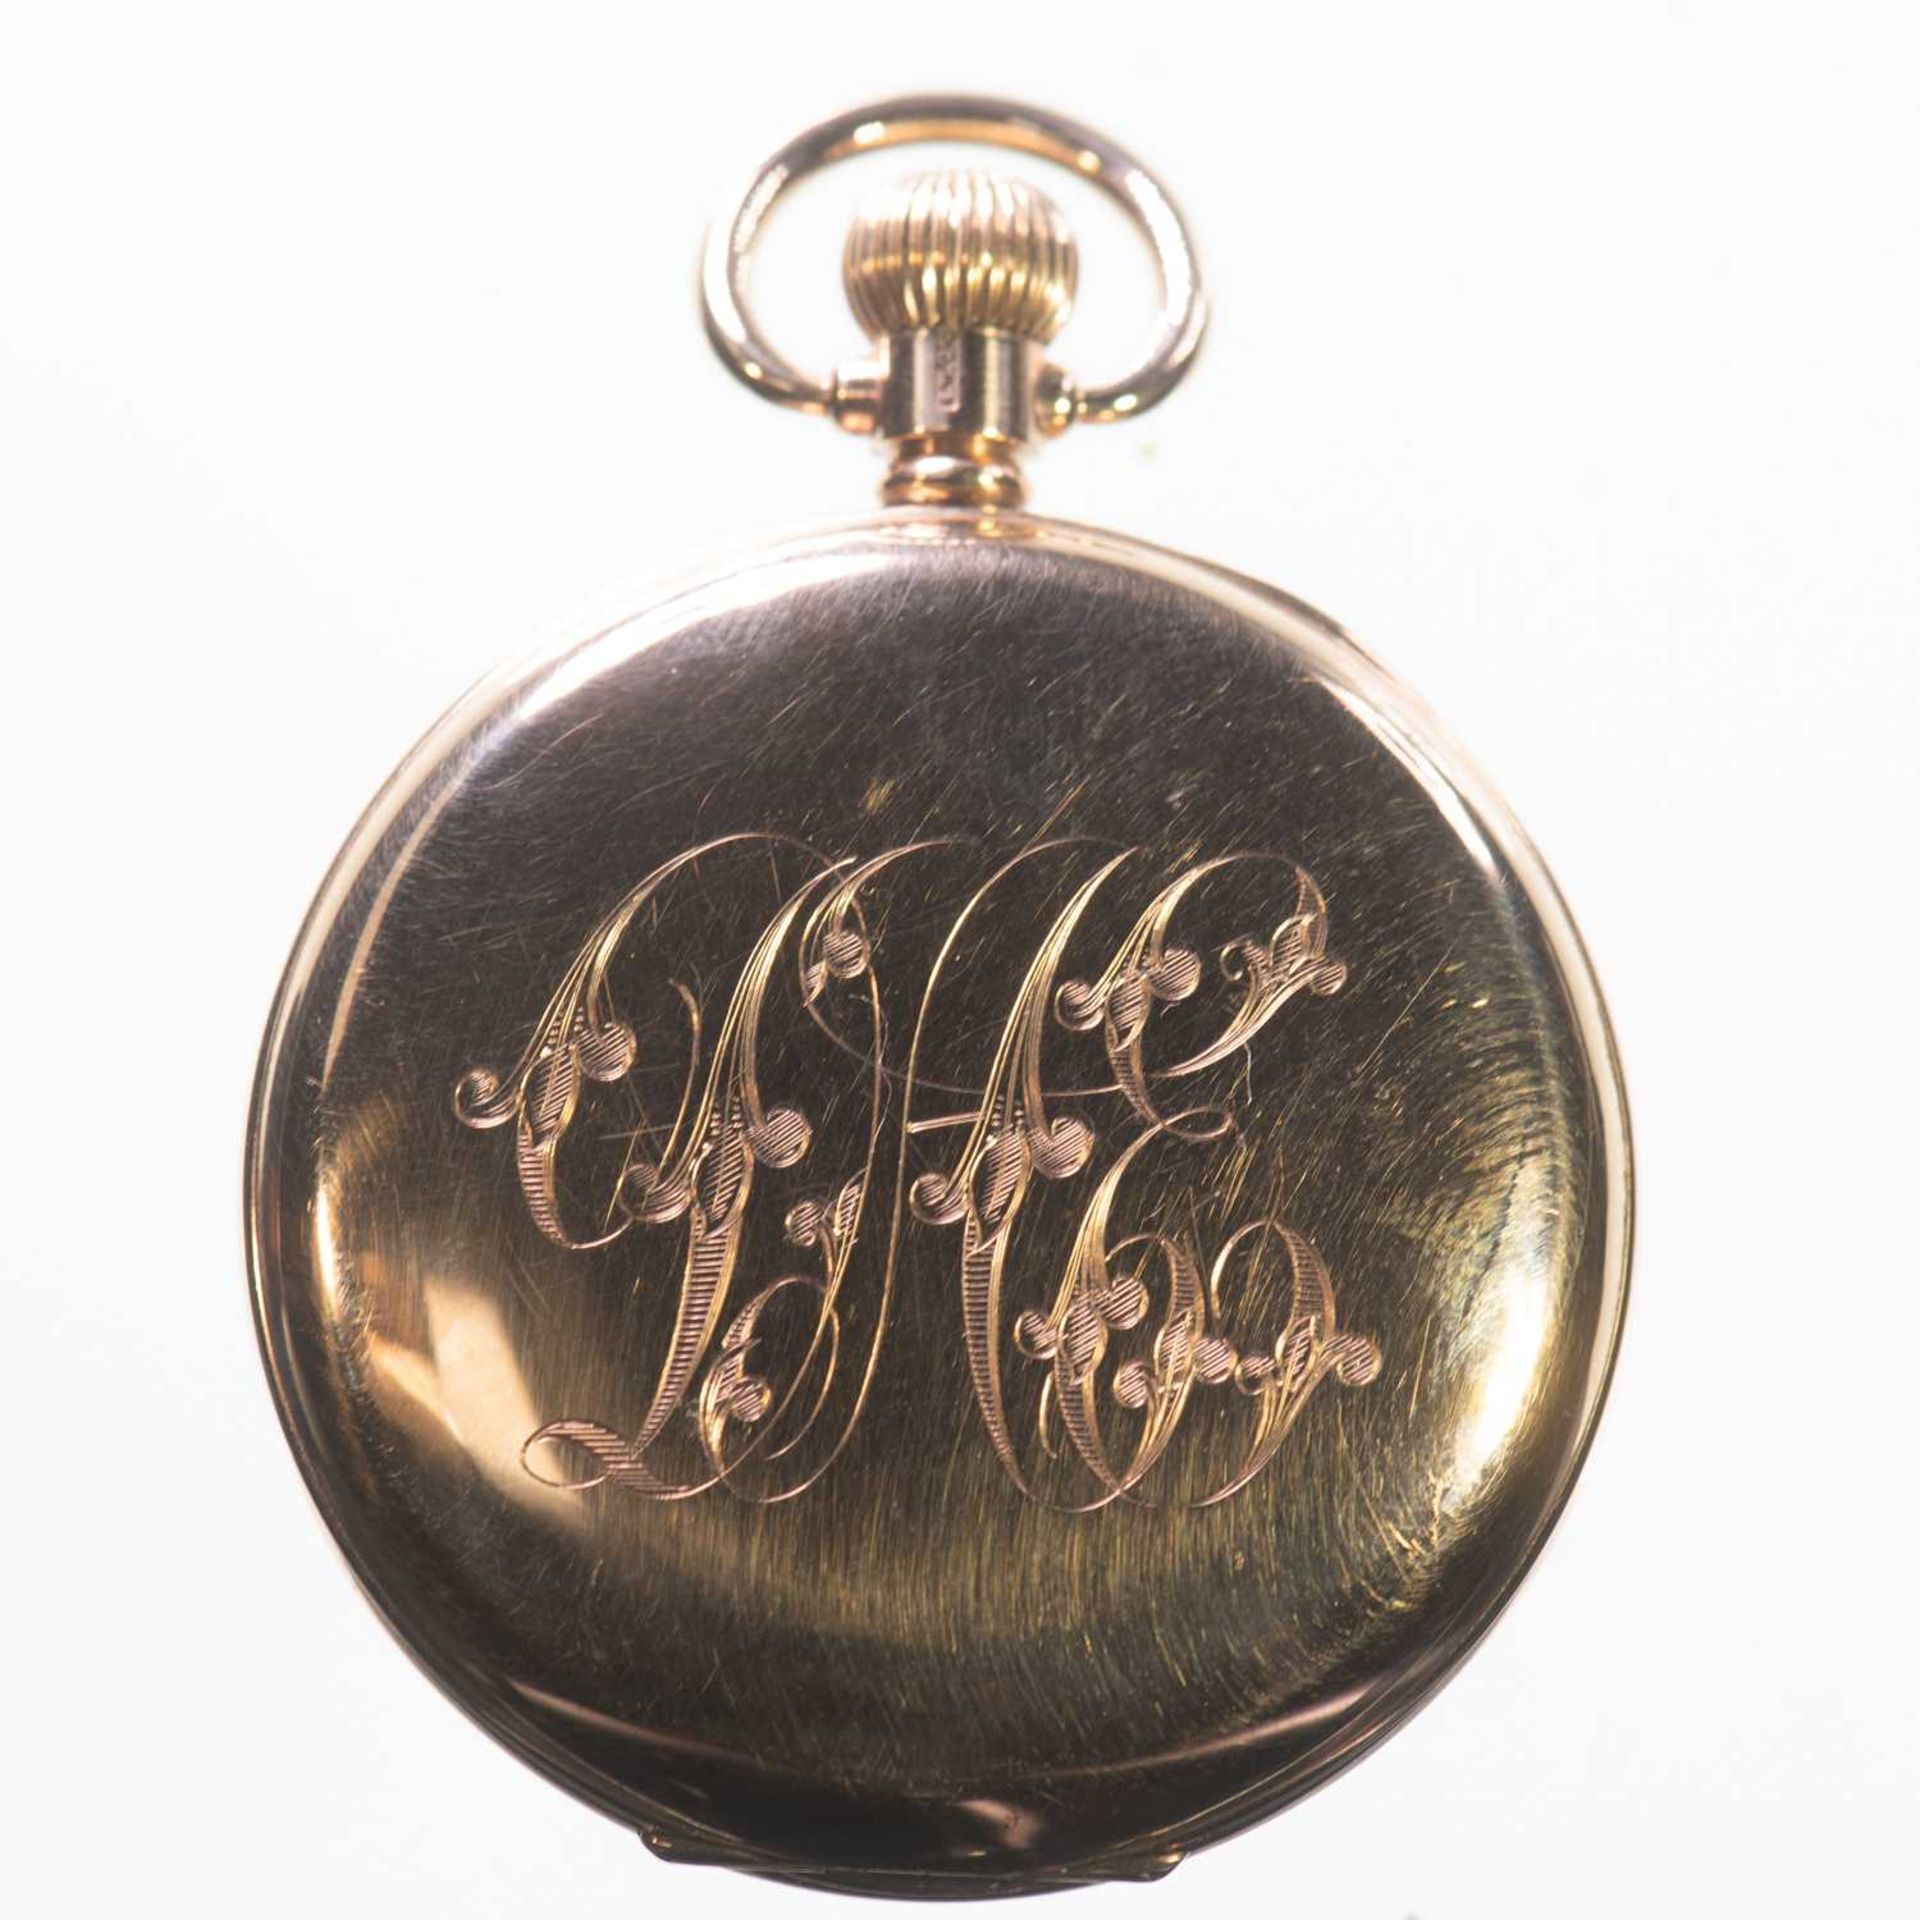 A 9CT GOLD OPEN FACED ELGIN POCKET WATCH - Image 2 of 3